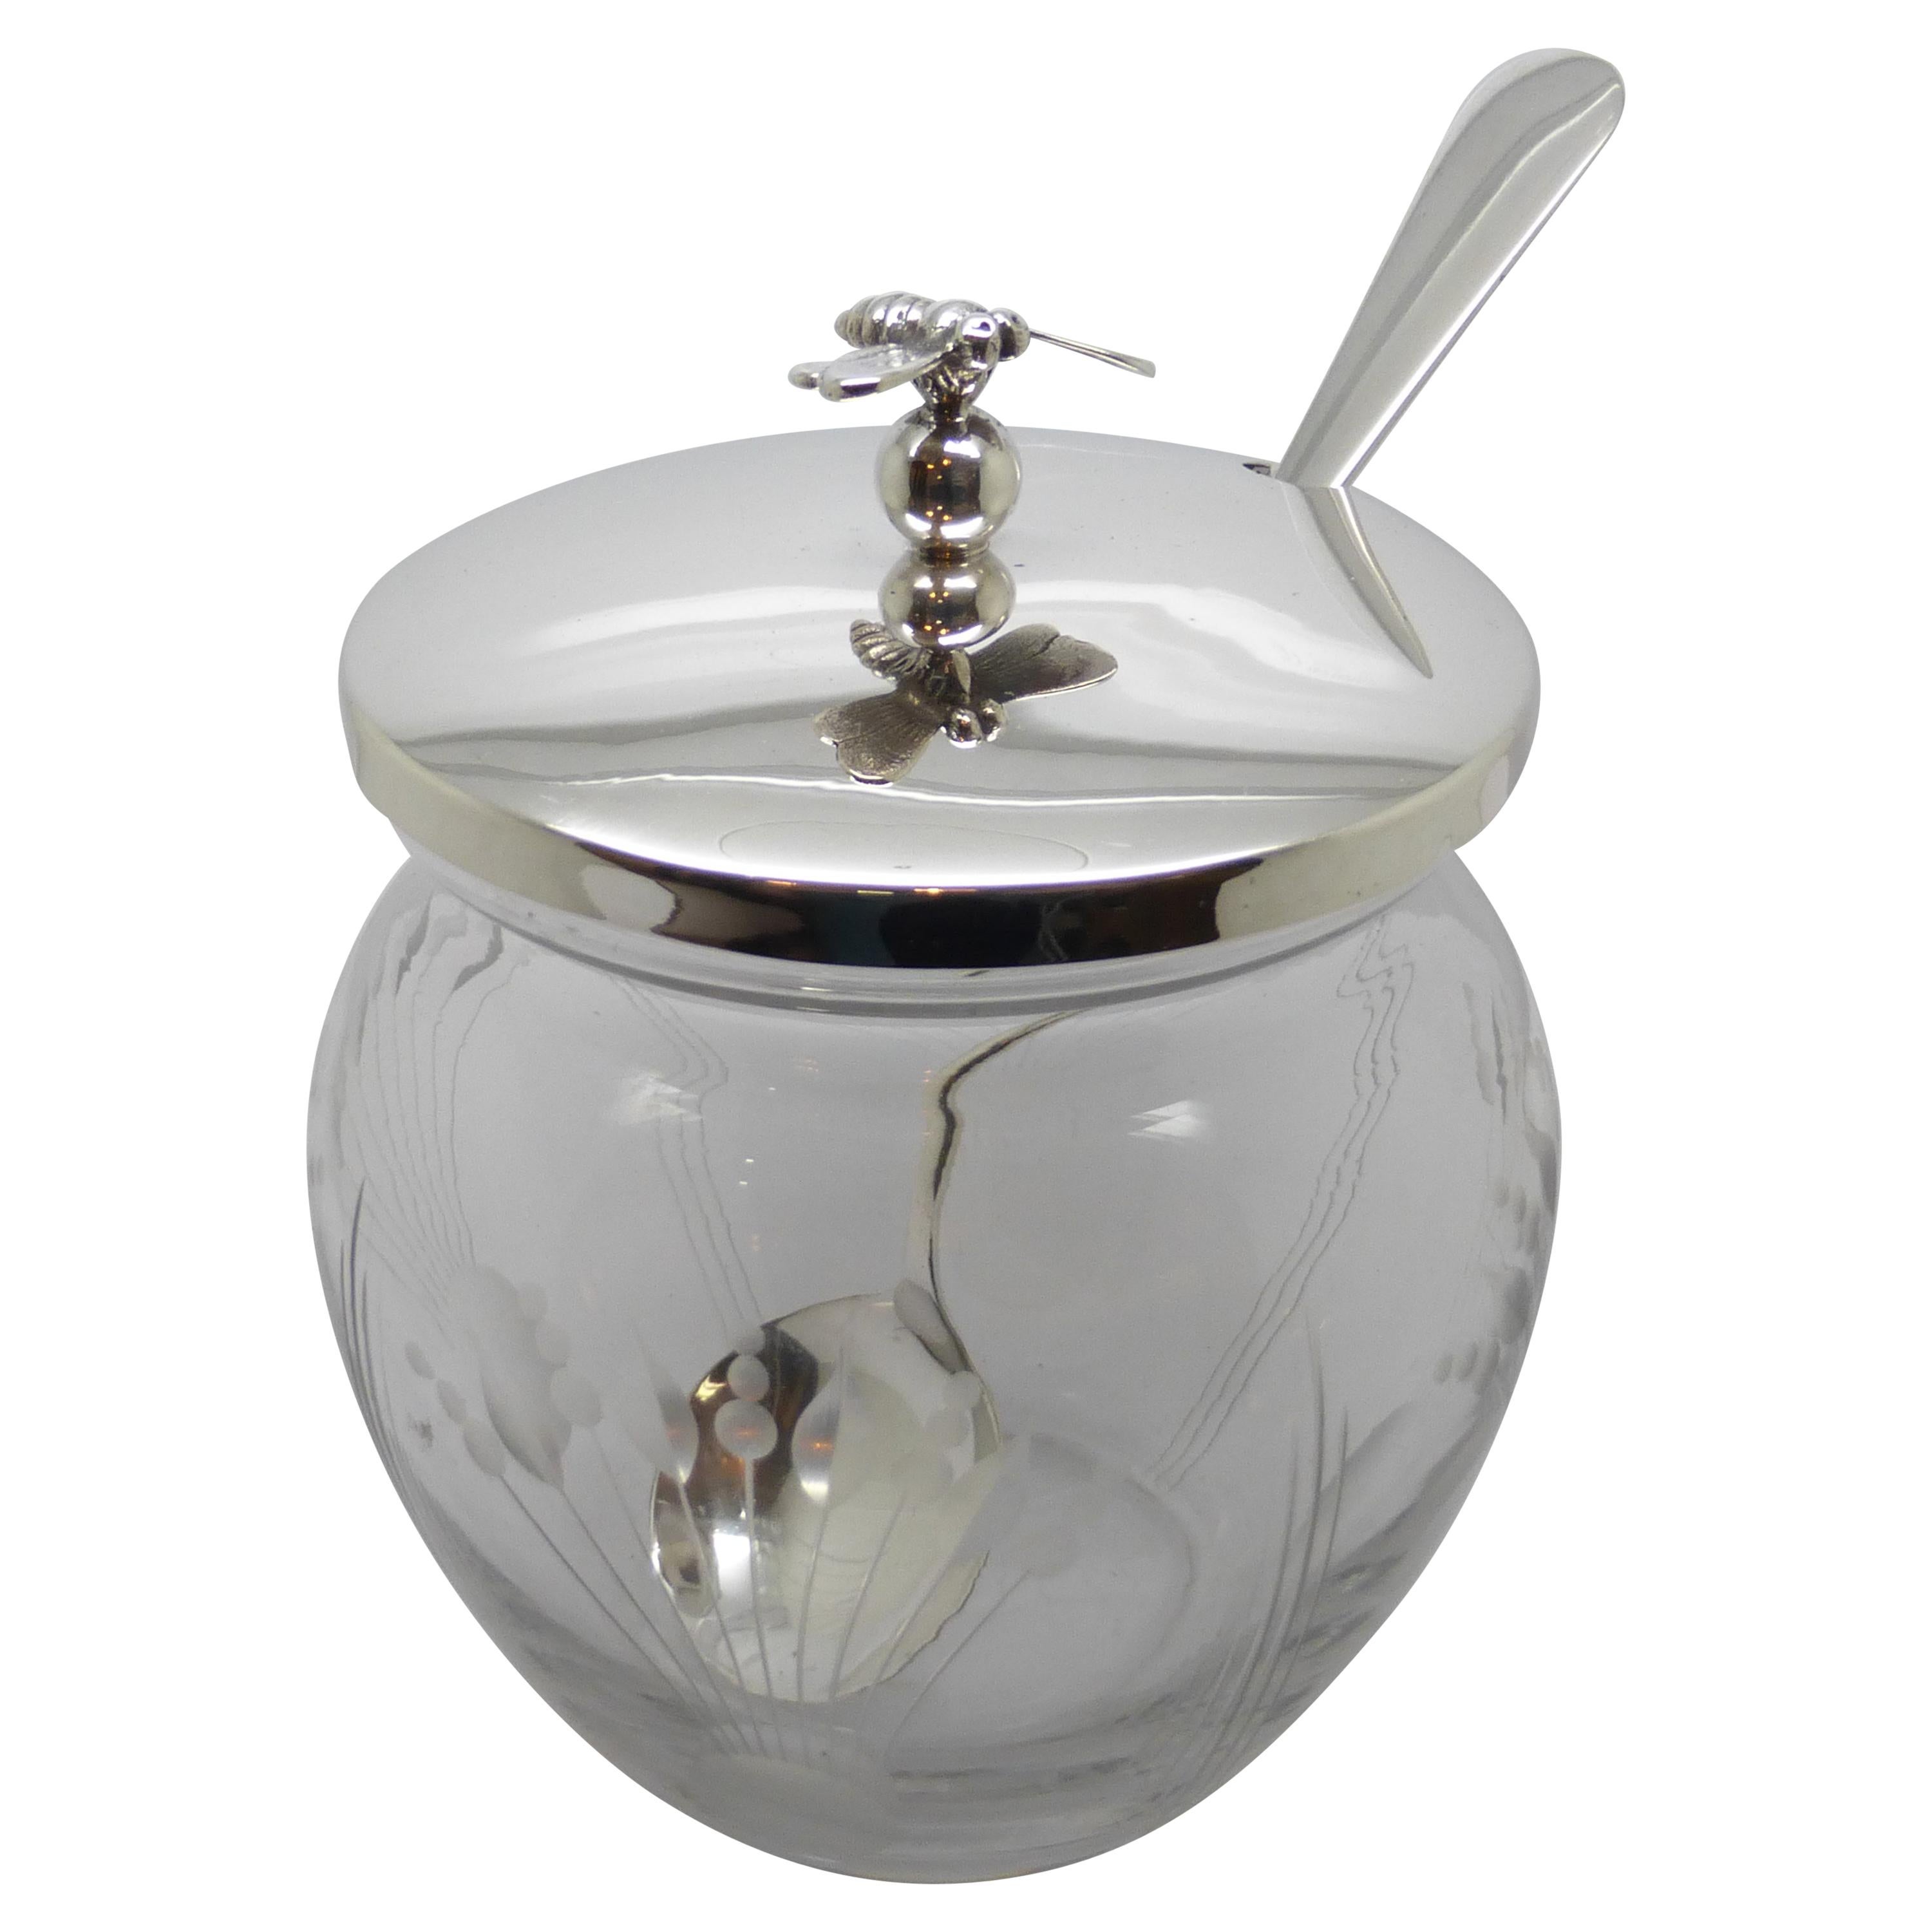 Edwardian Sterling Silver-Mounted Etched Honey Jar with Bumblebee Finial on Lid